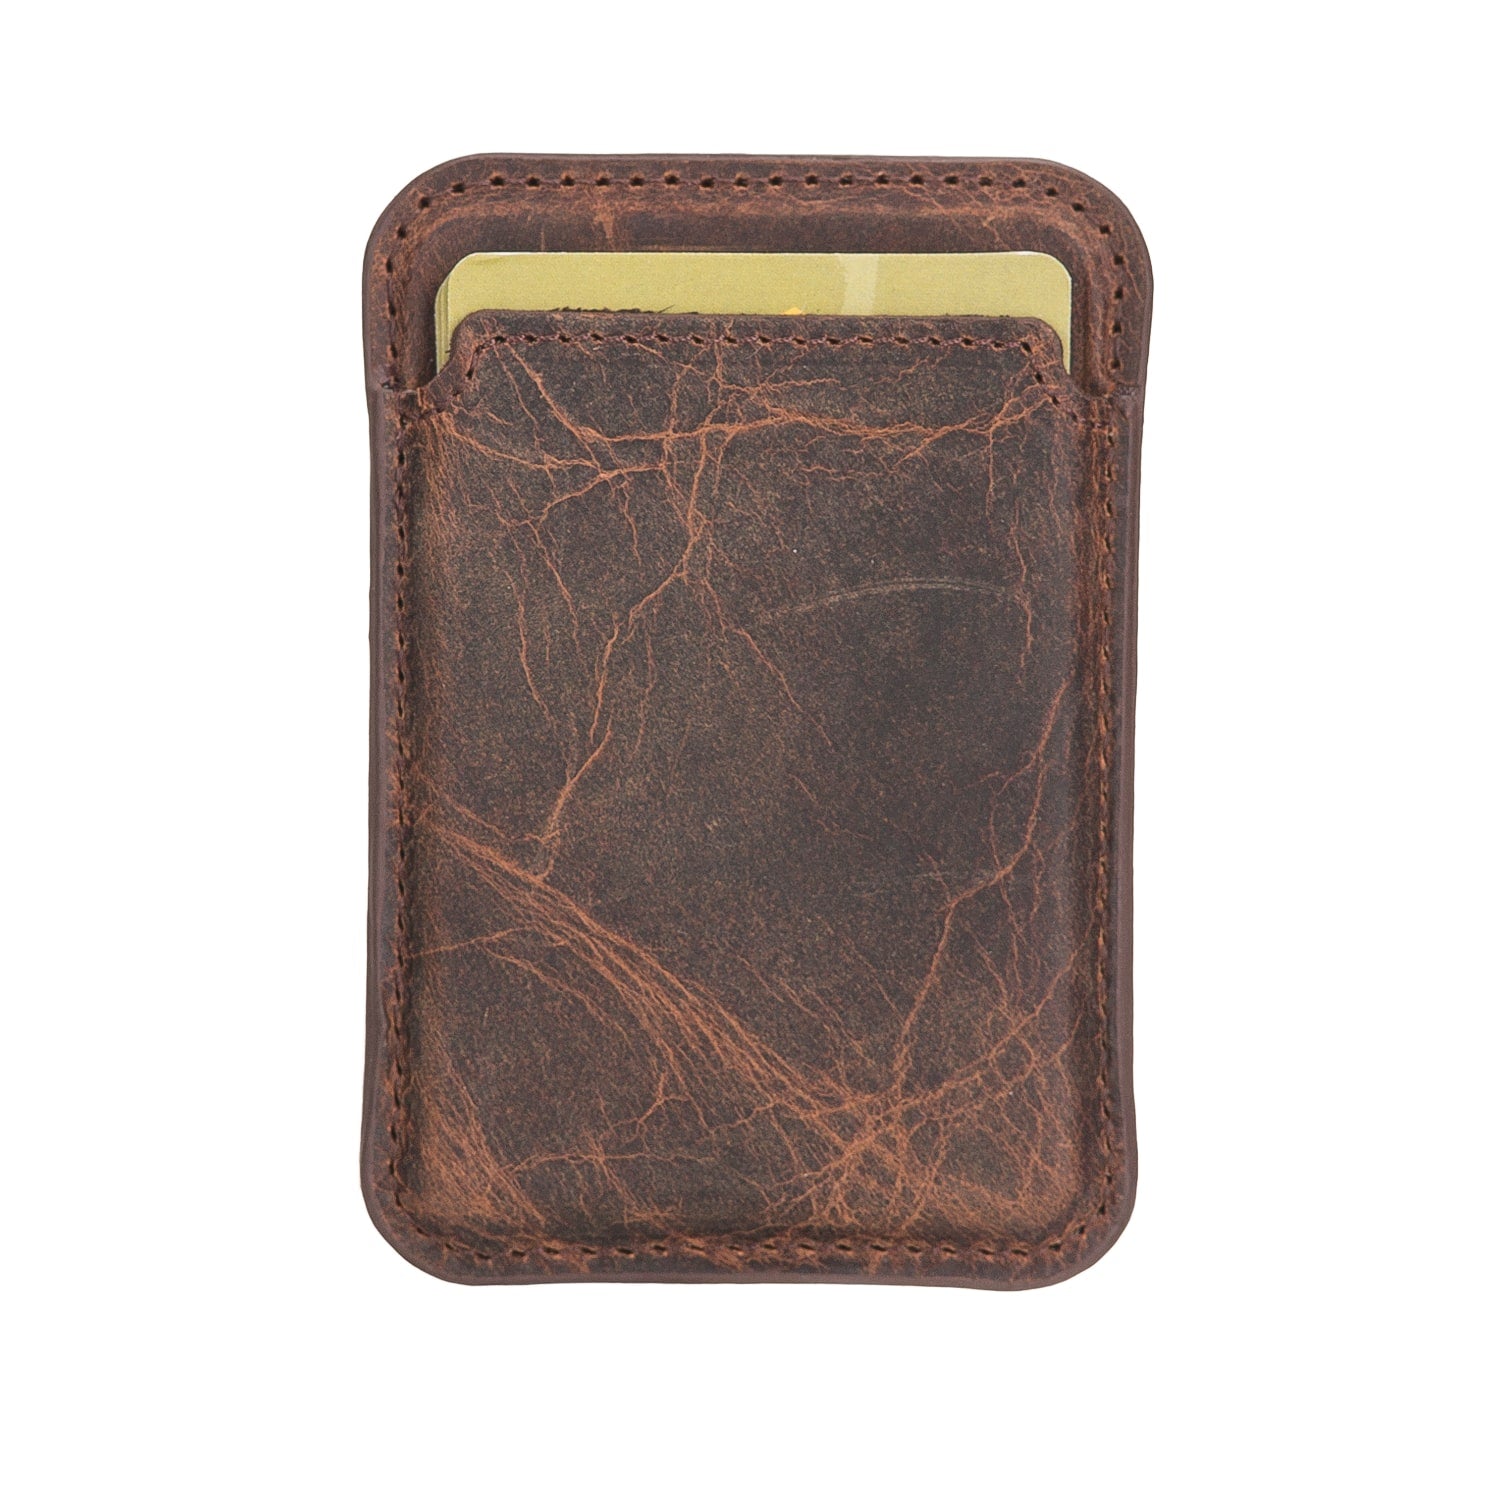 Tan Brown Leather Apple MagSafe Card Holder Magnetic Wallet for iPhone - Bomonti - 4